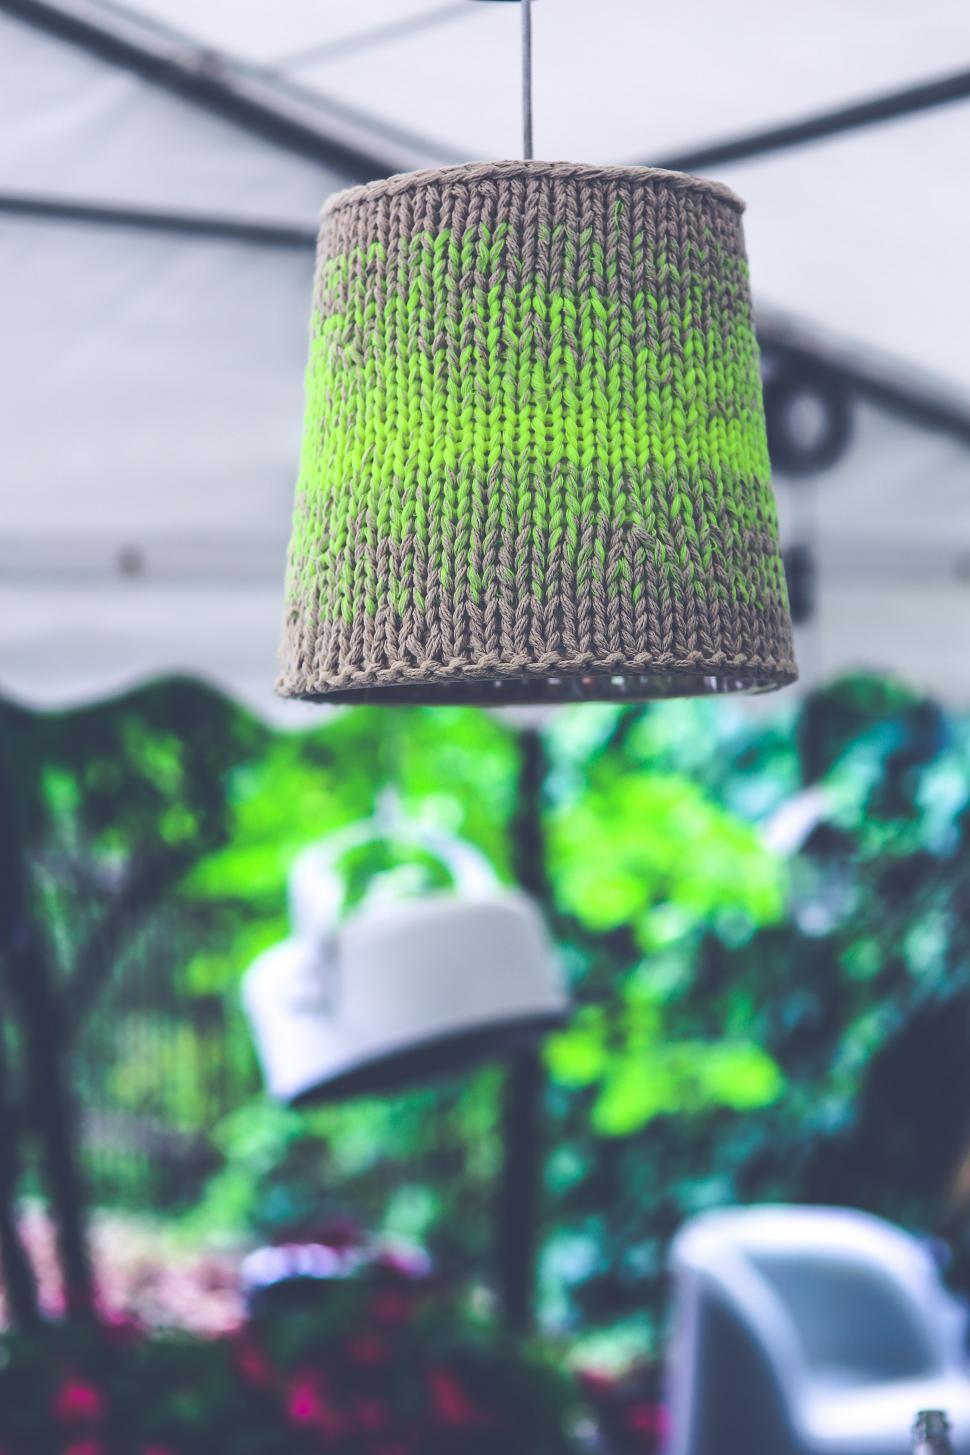 Free Image of Green Knitted Lamp Hanging From Ceiling 